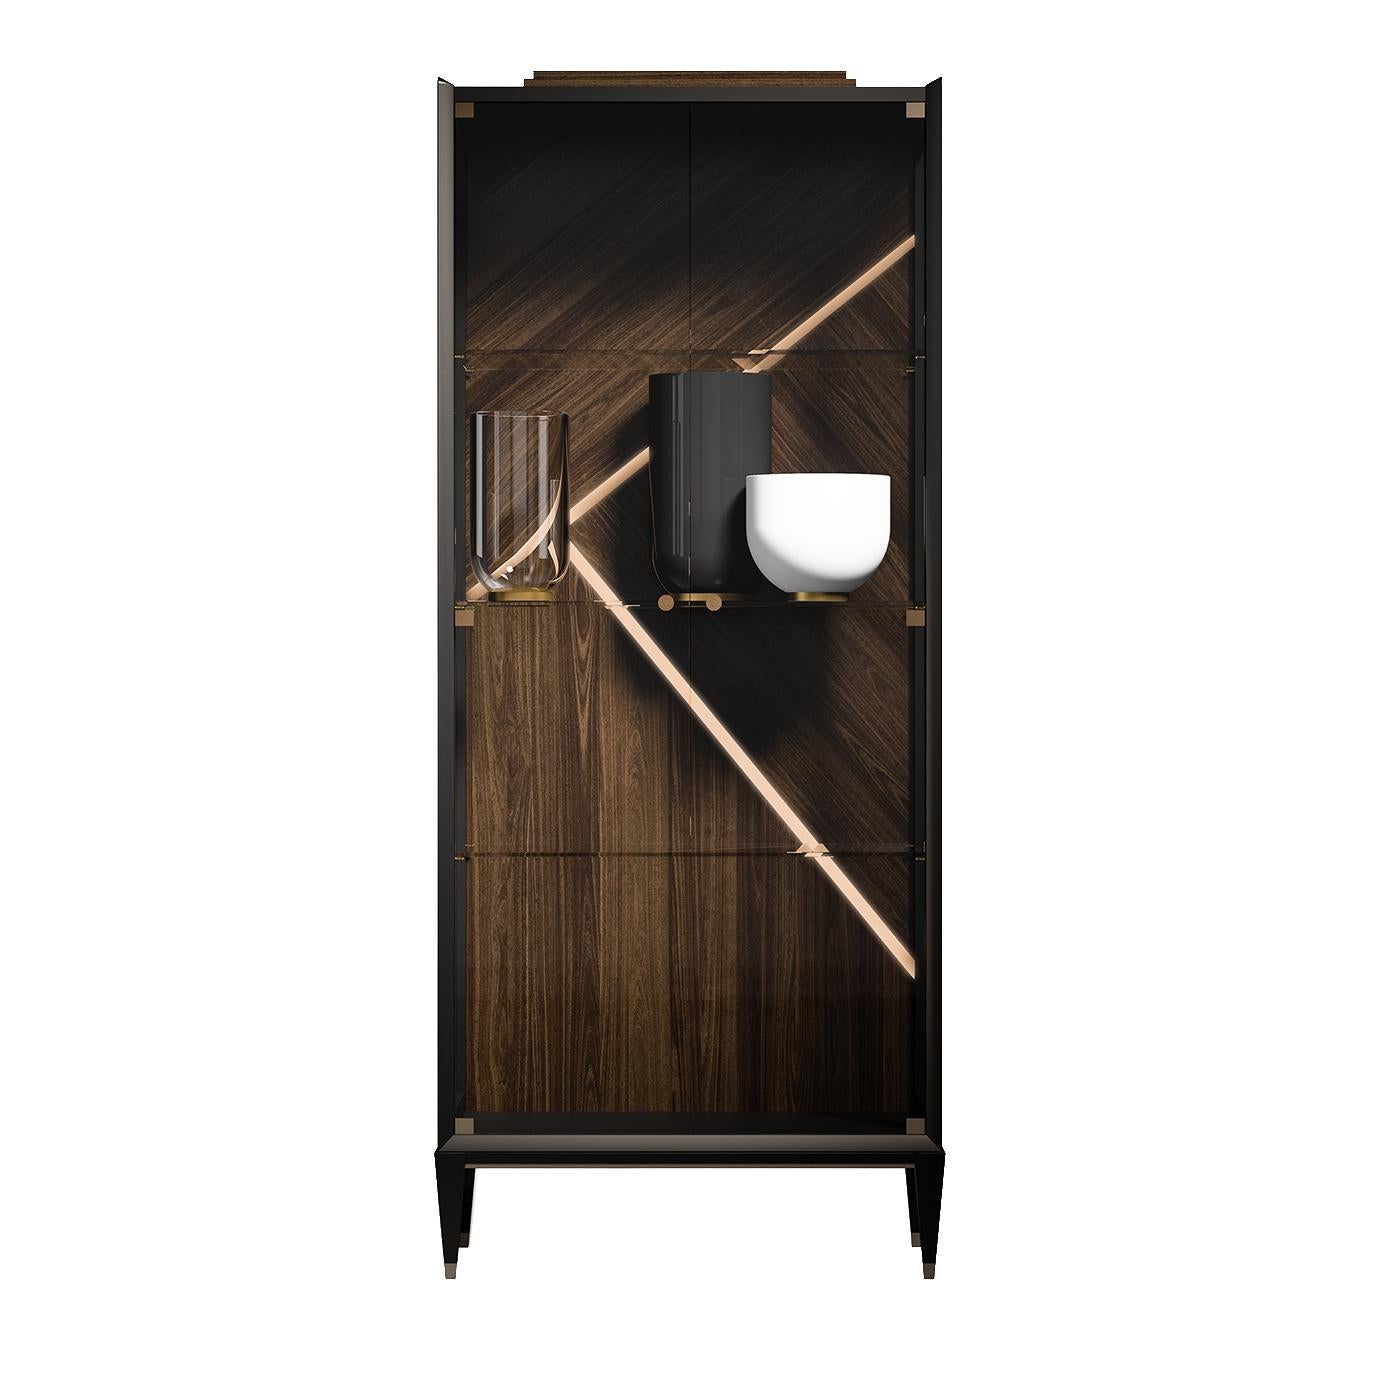 This sleek structure of mixed materials has a wooden frame with a velvet-like, black finish supported by four tapered feet with metal ferules. Both side and front panels are made of glass, with double doors that hinge open on a striking back panel